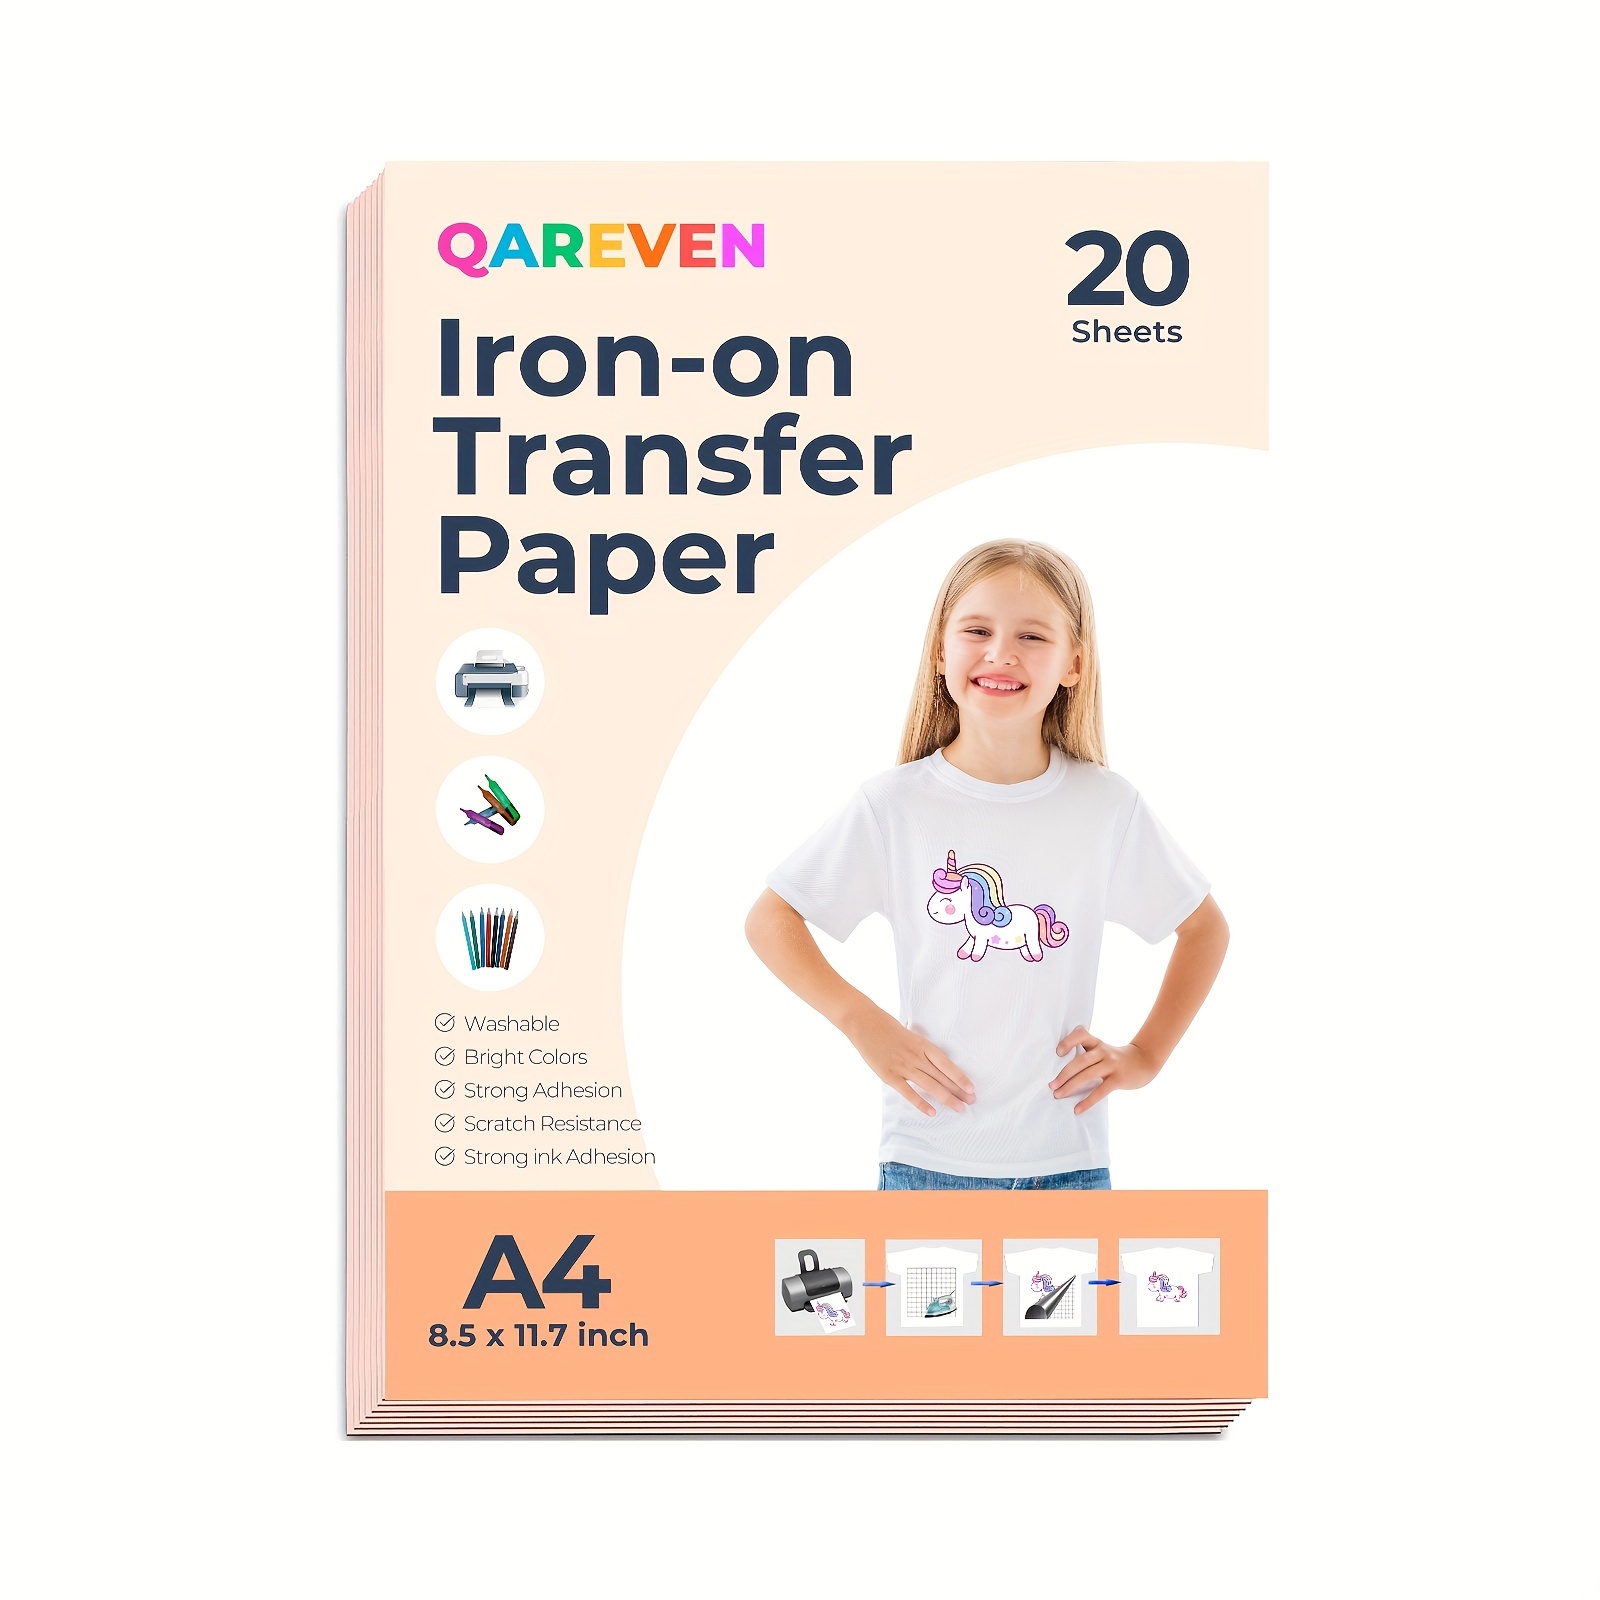 Tenare Inkjet Iron-on T Shirts Transfer Paper Printable Heat Transfer Vinyl  Heat Transfer Paper DIY for Dark and Light Fabric (50 Sheets)